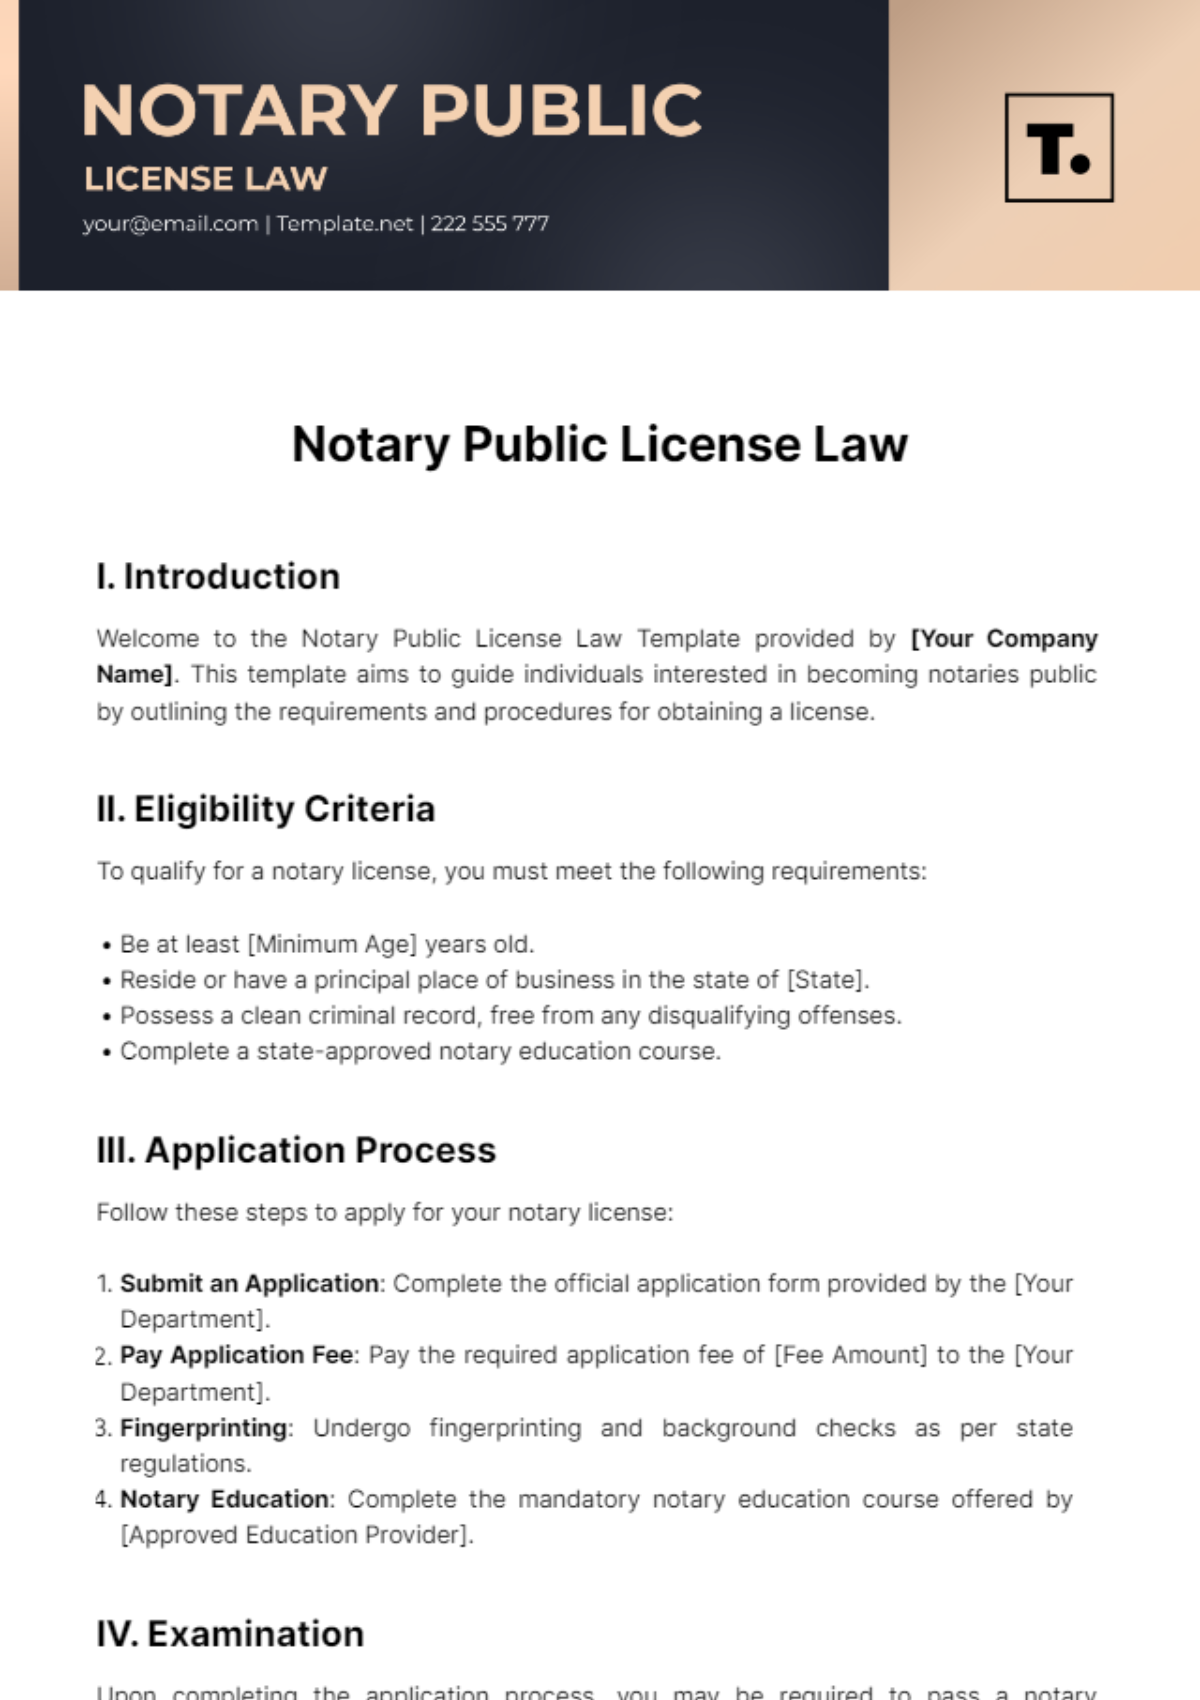 Free Notary Public License Law Template